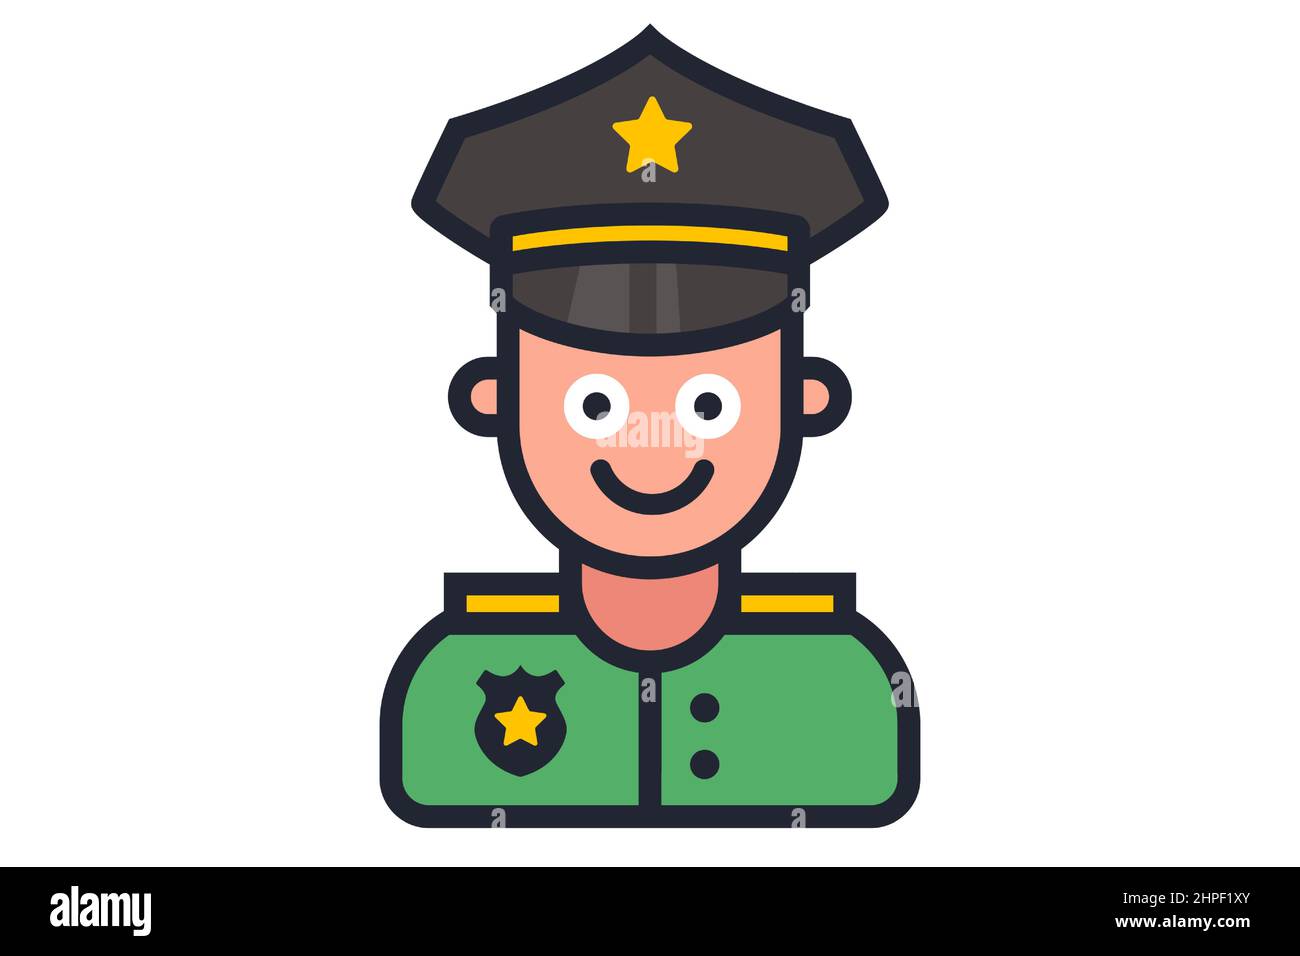 icon of a smiling police officer on a white background. flat vector illustration Stock Vector